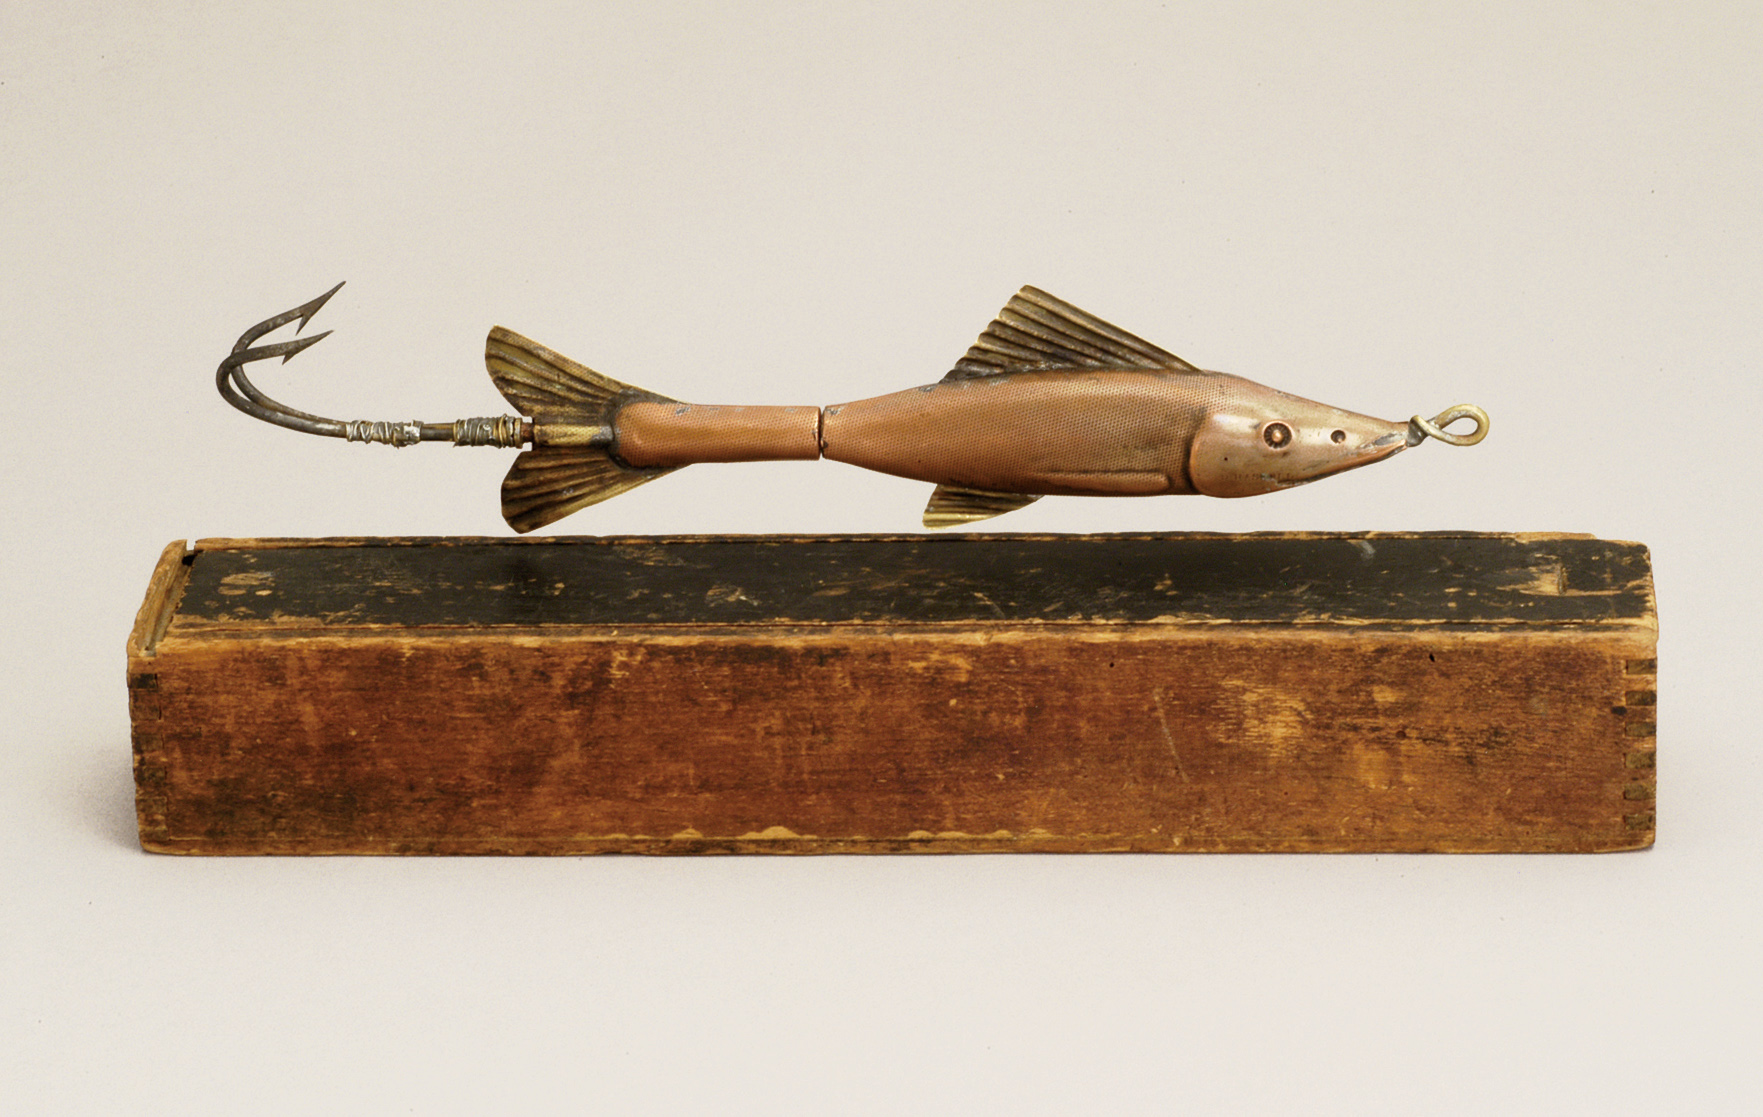 Six vintage fishing lures in boxes sold at auction on 19th August